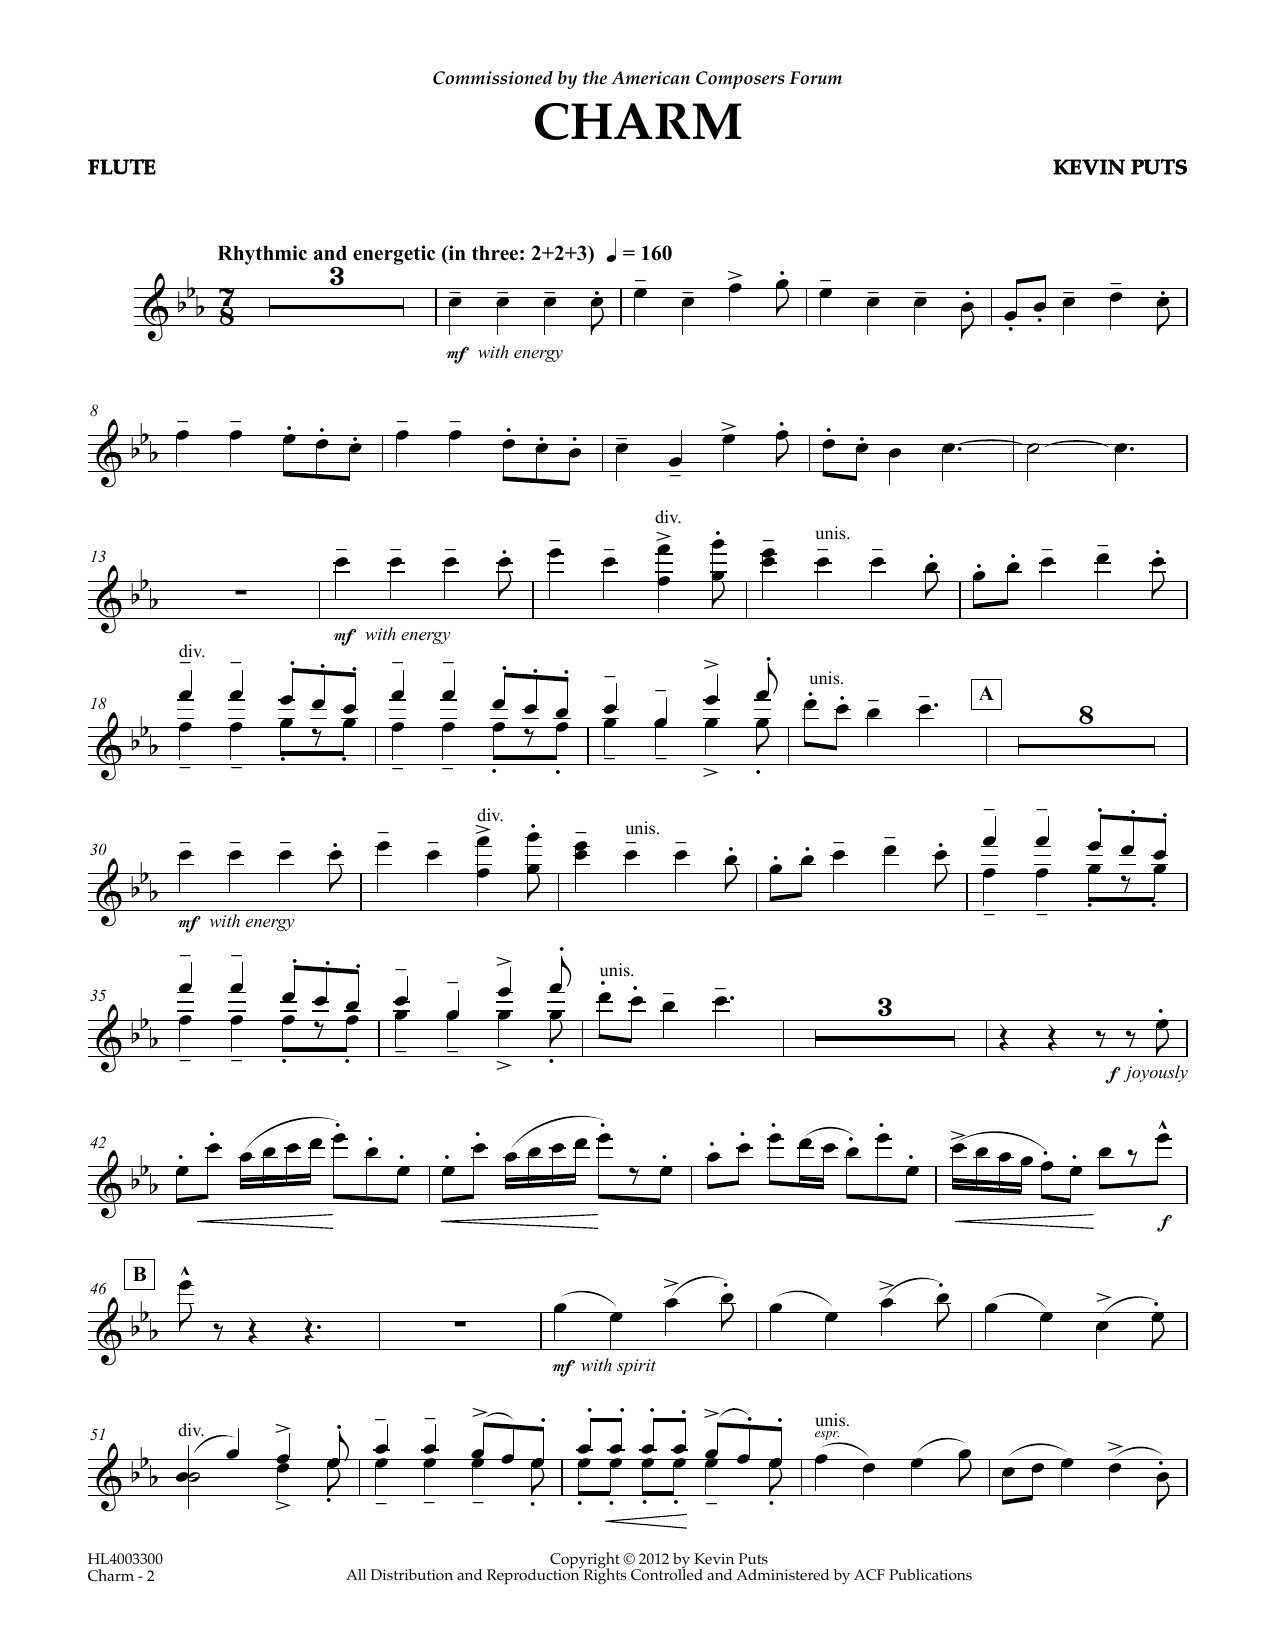 Download Kevin Puts Charm - Flute Sheet Music